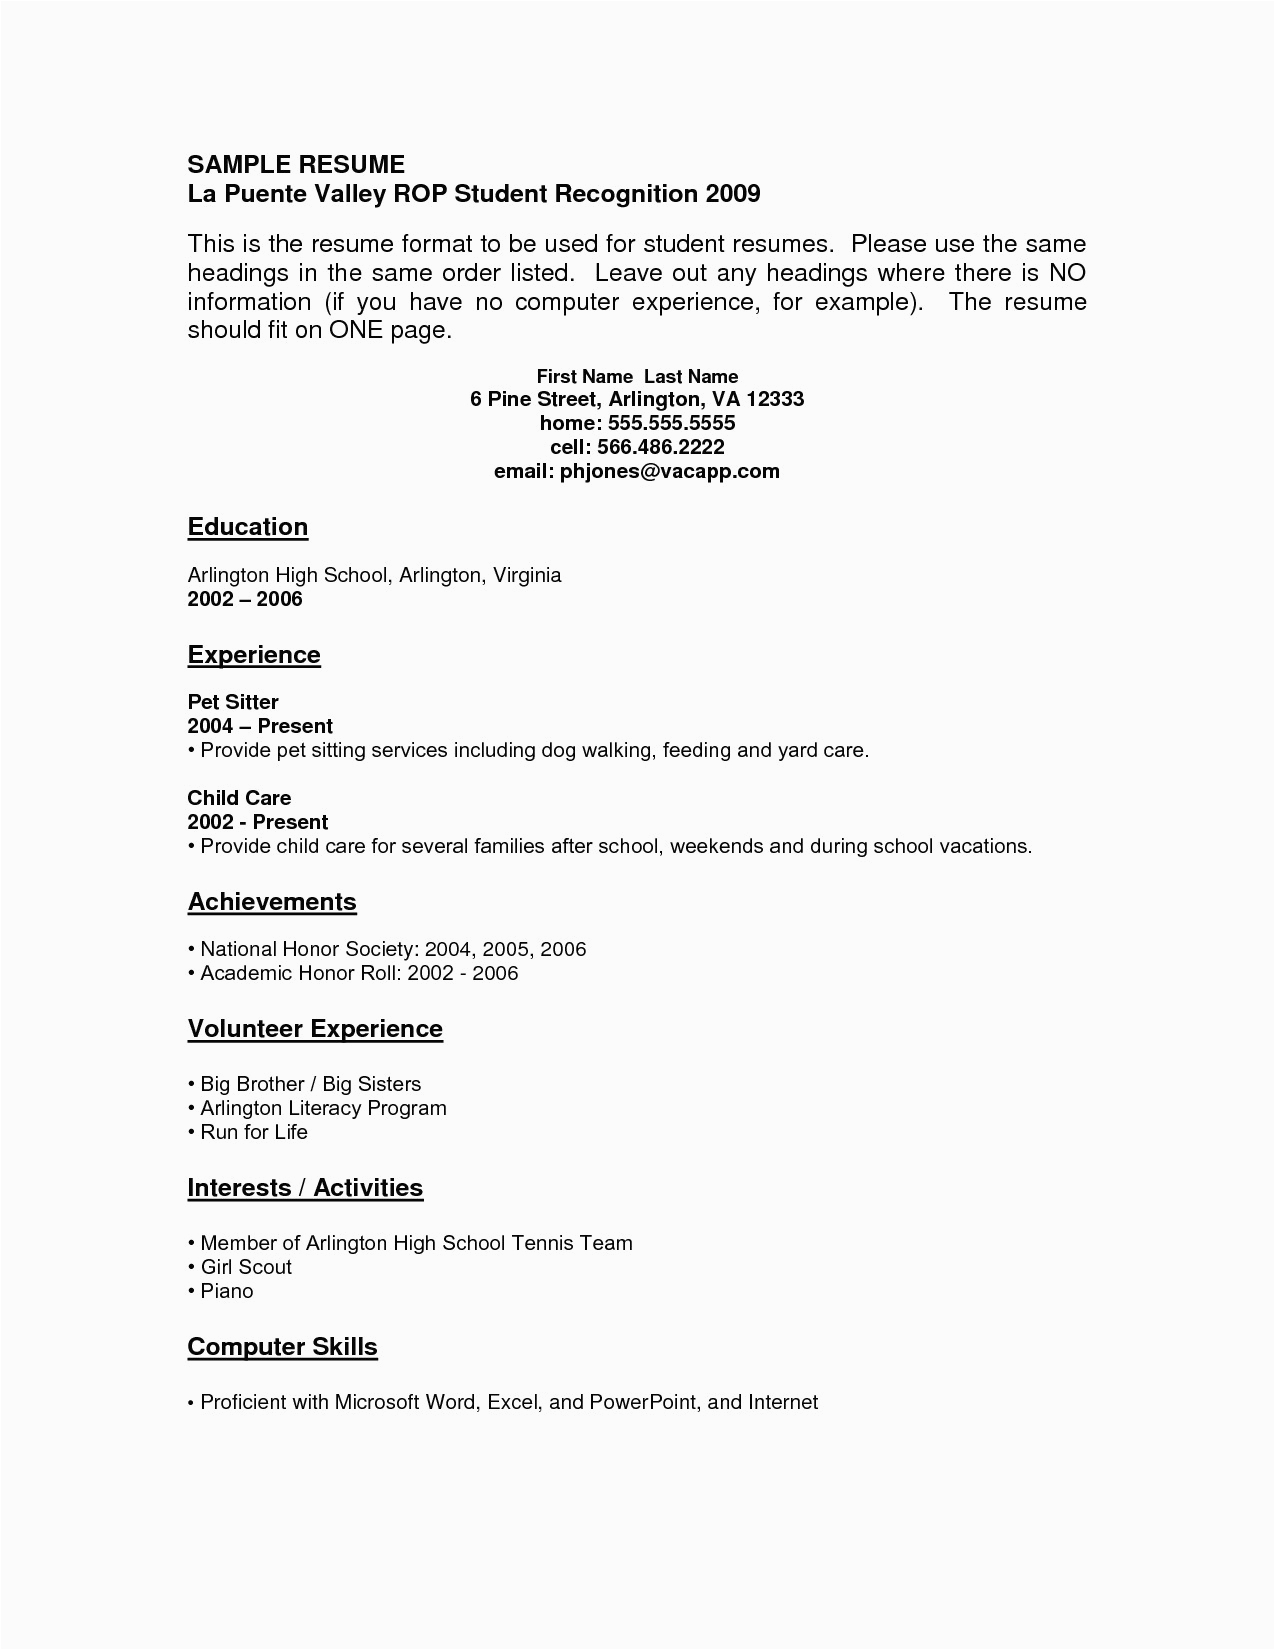 Functional Resume Samples with No Job Experience Free Resume Templates for High School Students with No Experience